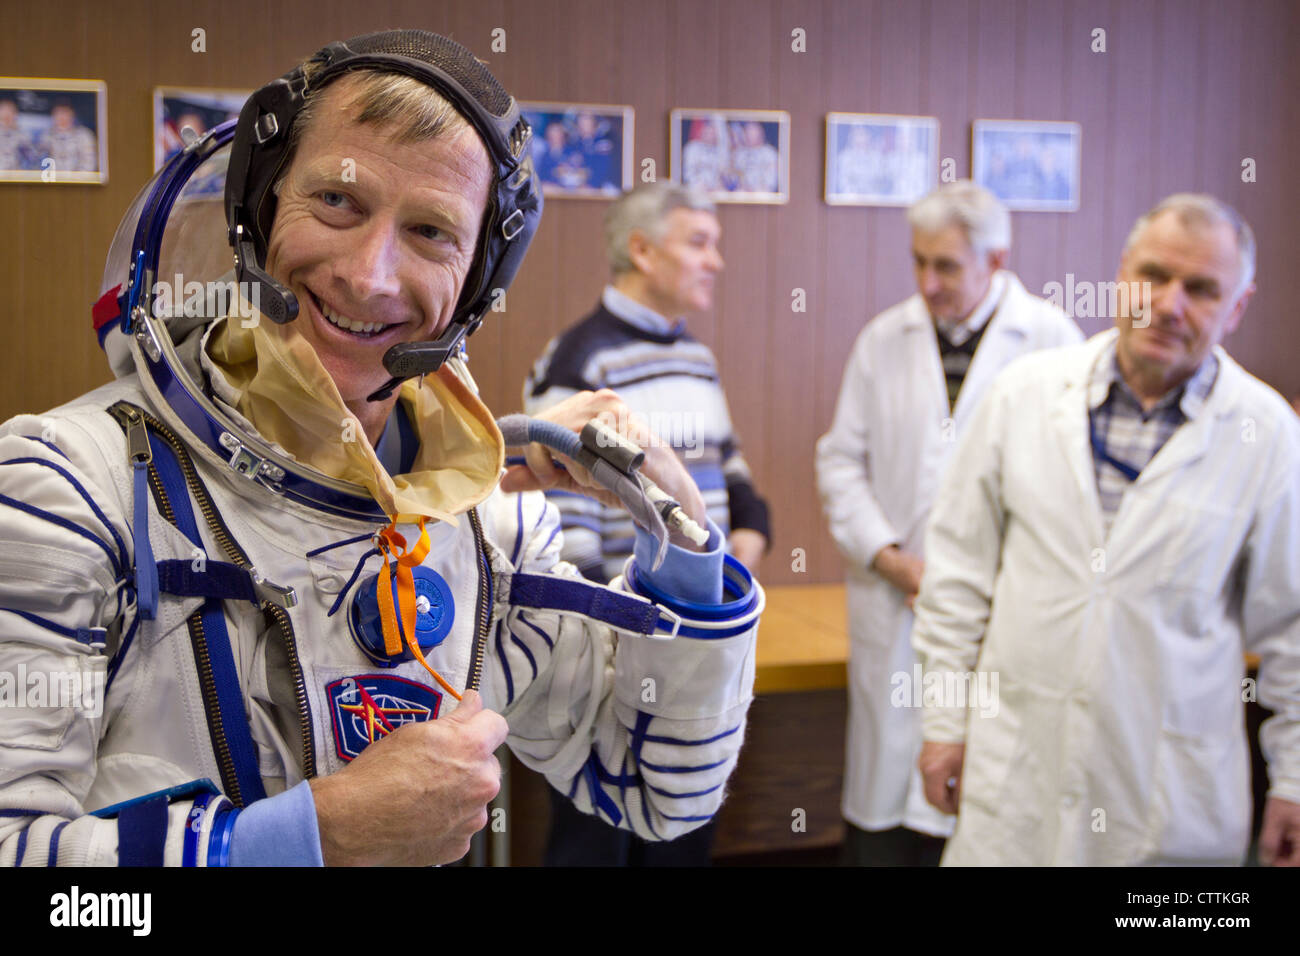 NASA astronaut Chris Ferguson, STS-135 commander, undergoes a fit check of his Sokol spacesuit at the Zvezda facility in Moscow, Russia on March 29, 2011. The crew of the final shuttle mission traveled to Moscow for a suit fit check of their Russian Sokol suits which would be required in the event of an emergency. Stock Photo